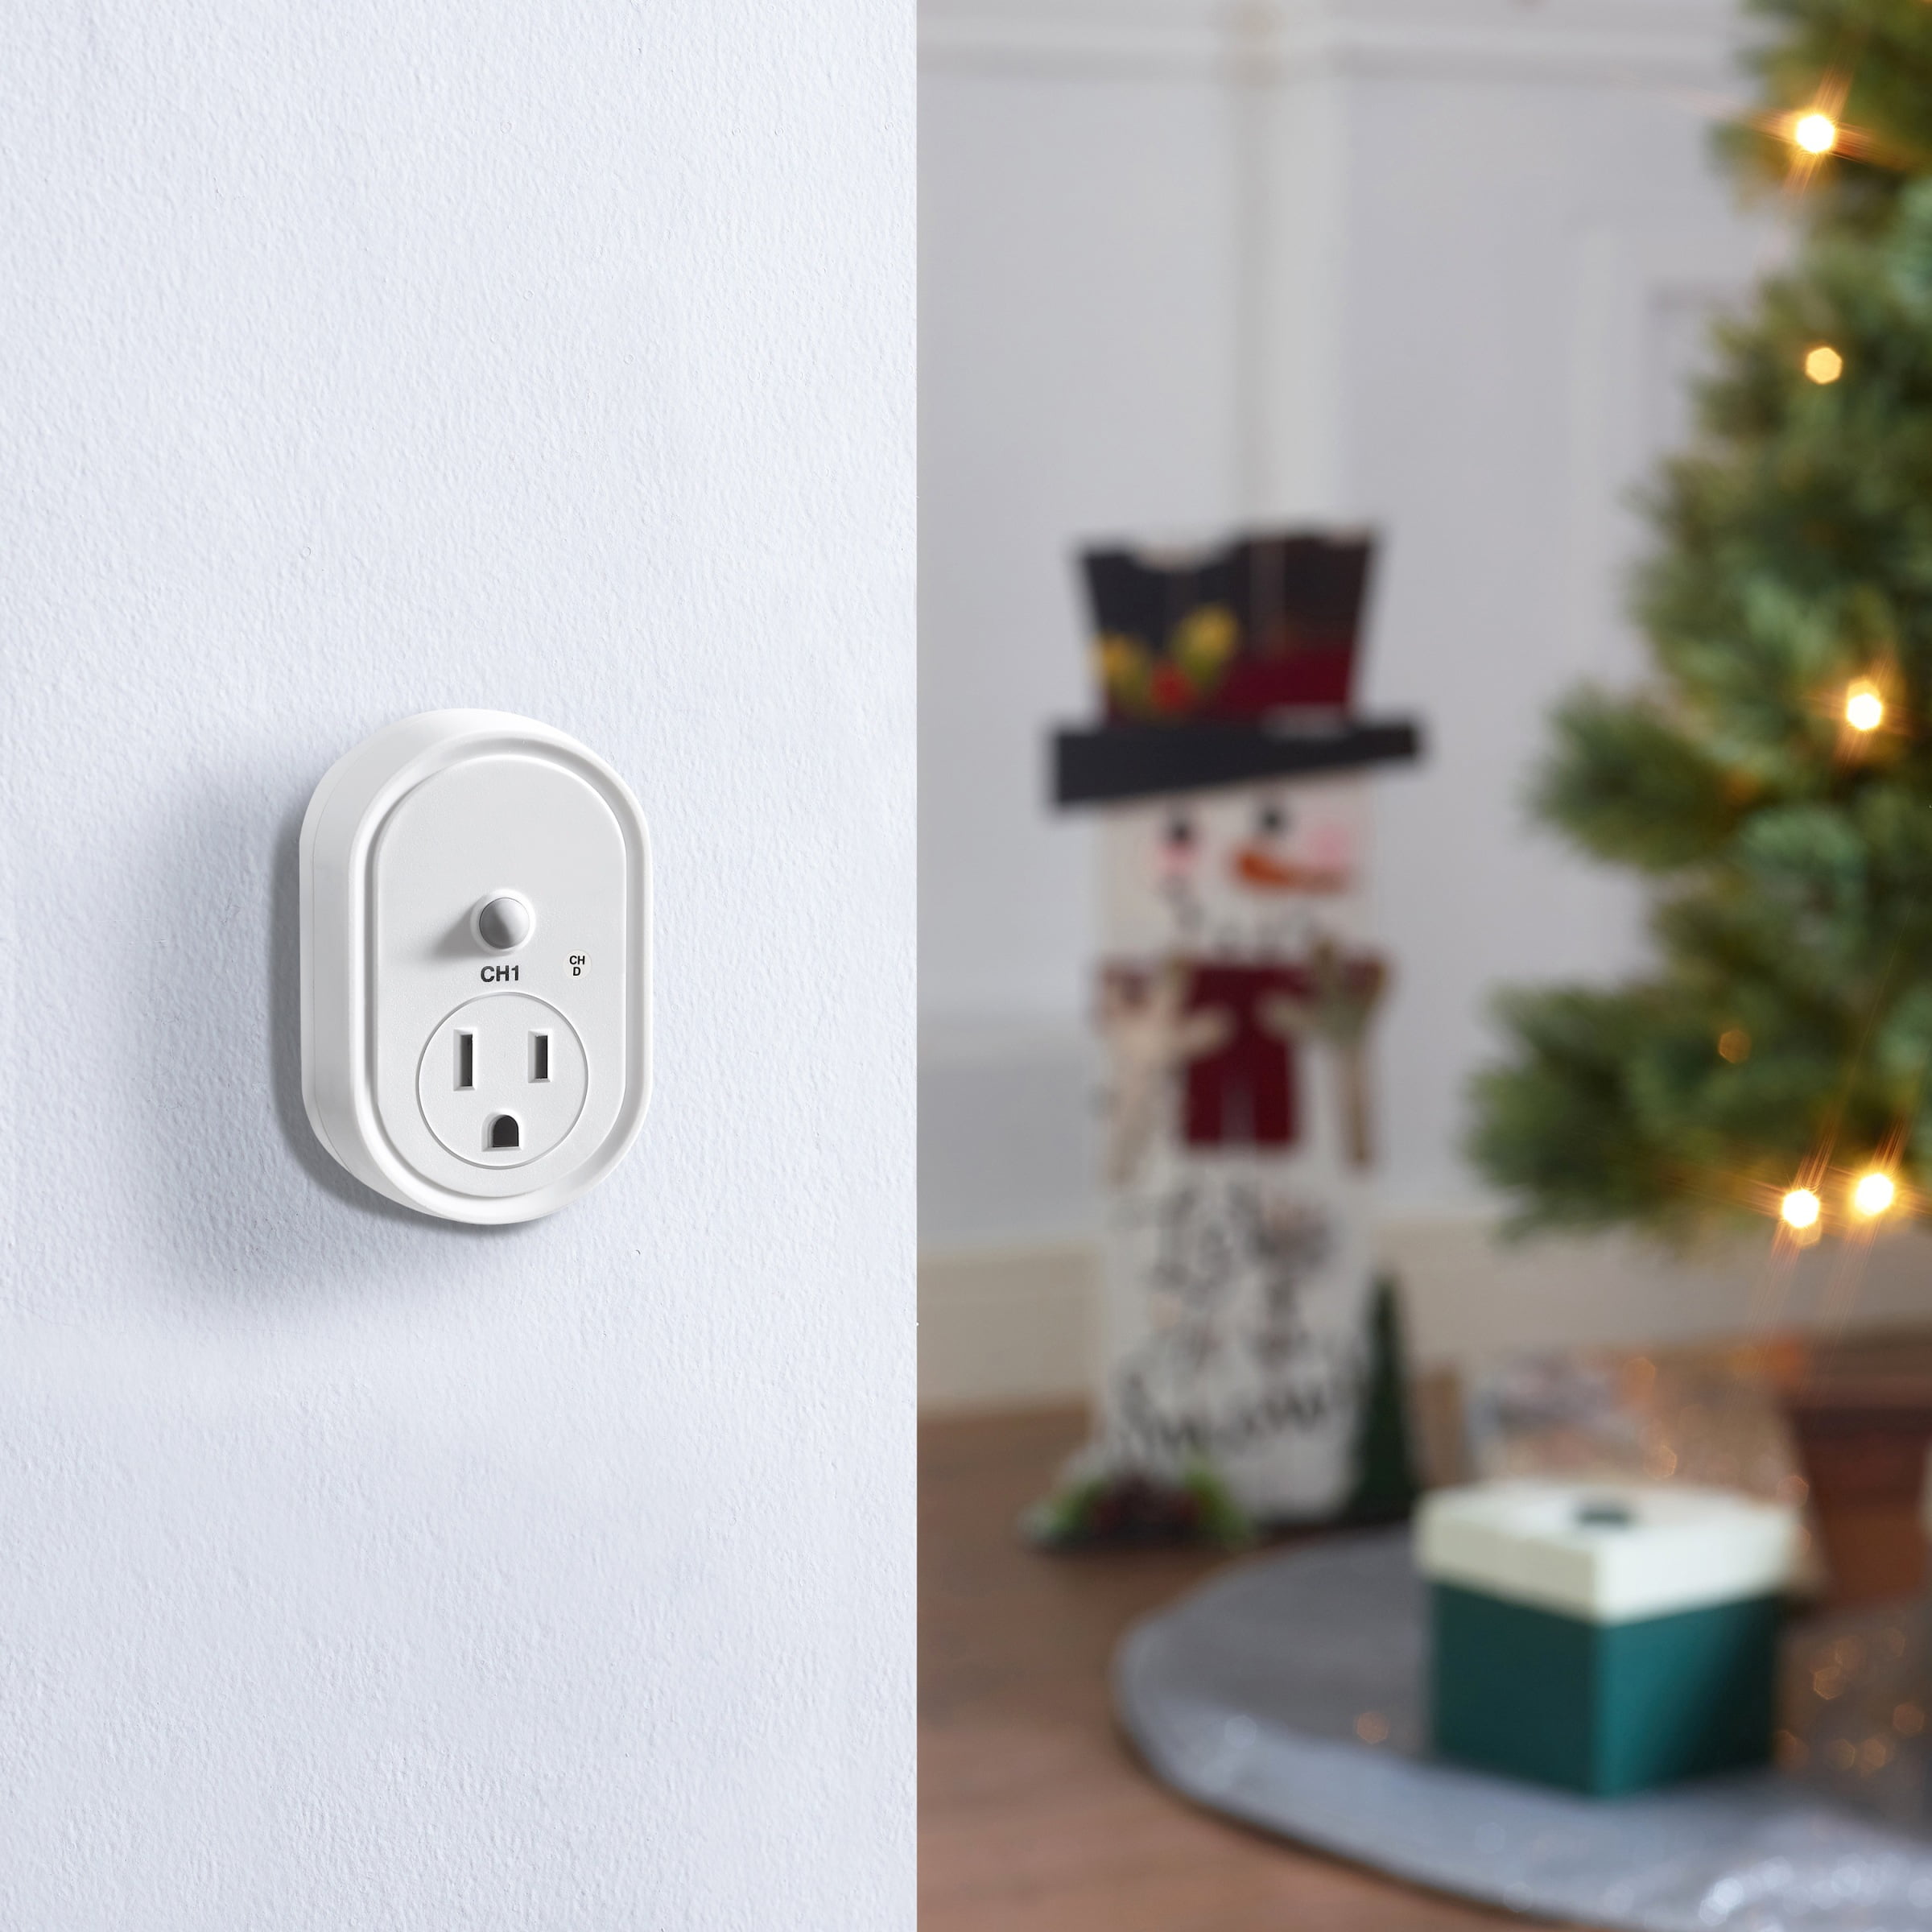 Discounted Remote Control Outlets from $5 - Great for Christmas Tree